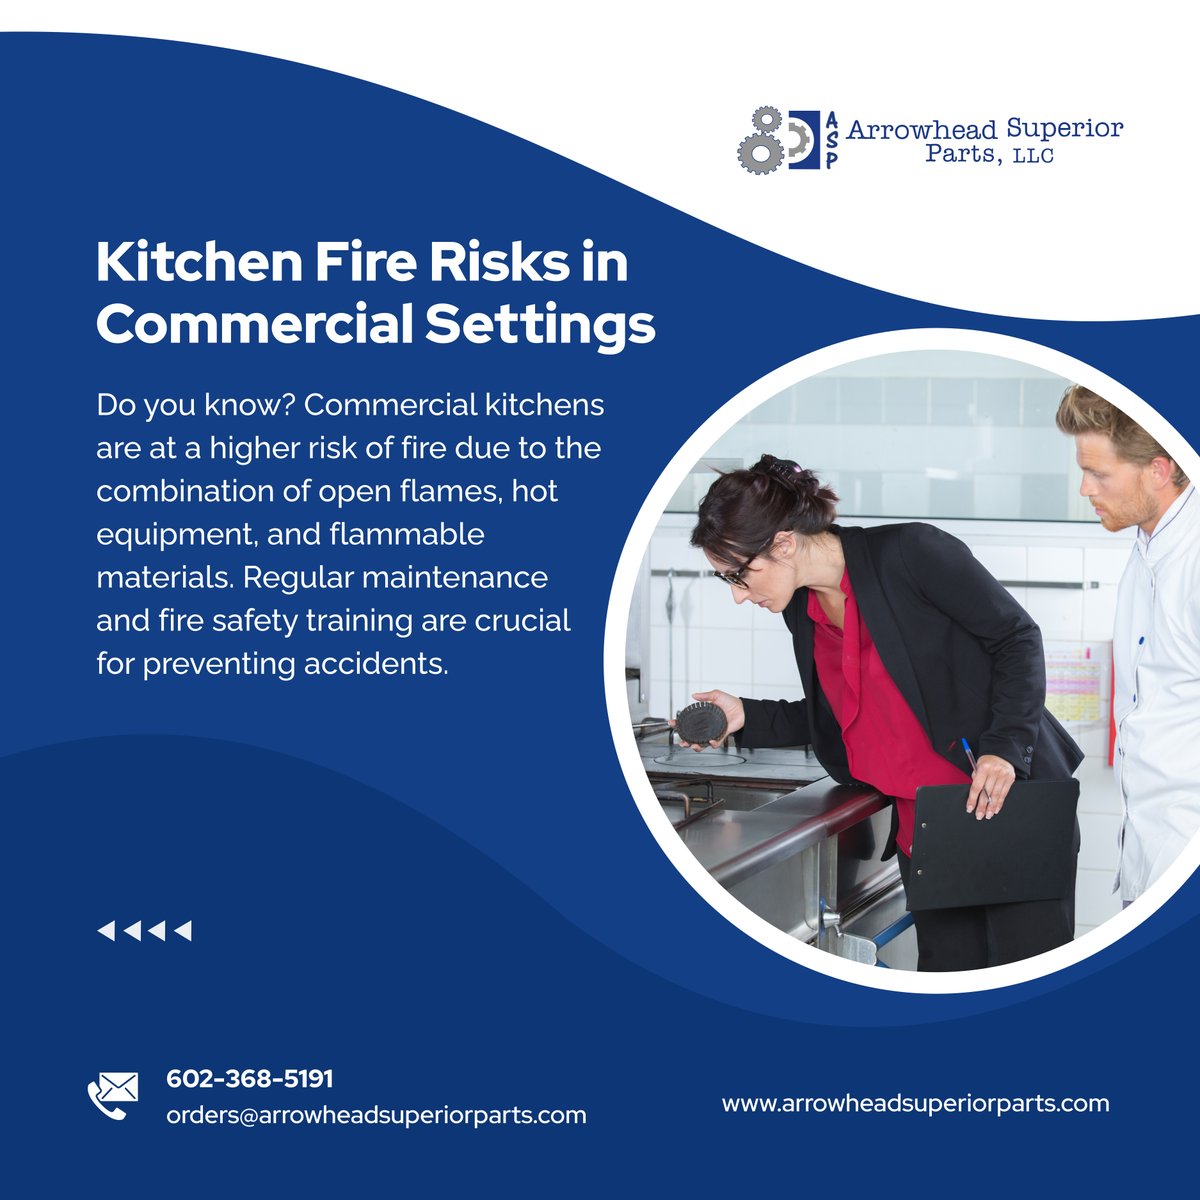 Learn about the fire risks in commercial kitchens and how Arrowhead Superior Parts LLC can help you mitigate them with quality OEM parts and safety solutions. 

#CommercialKitchenSafety #FirePrevention #PeoriaAZ #OEMPartsProvider #CommercialKitchens #FireSafety